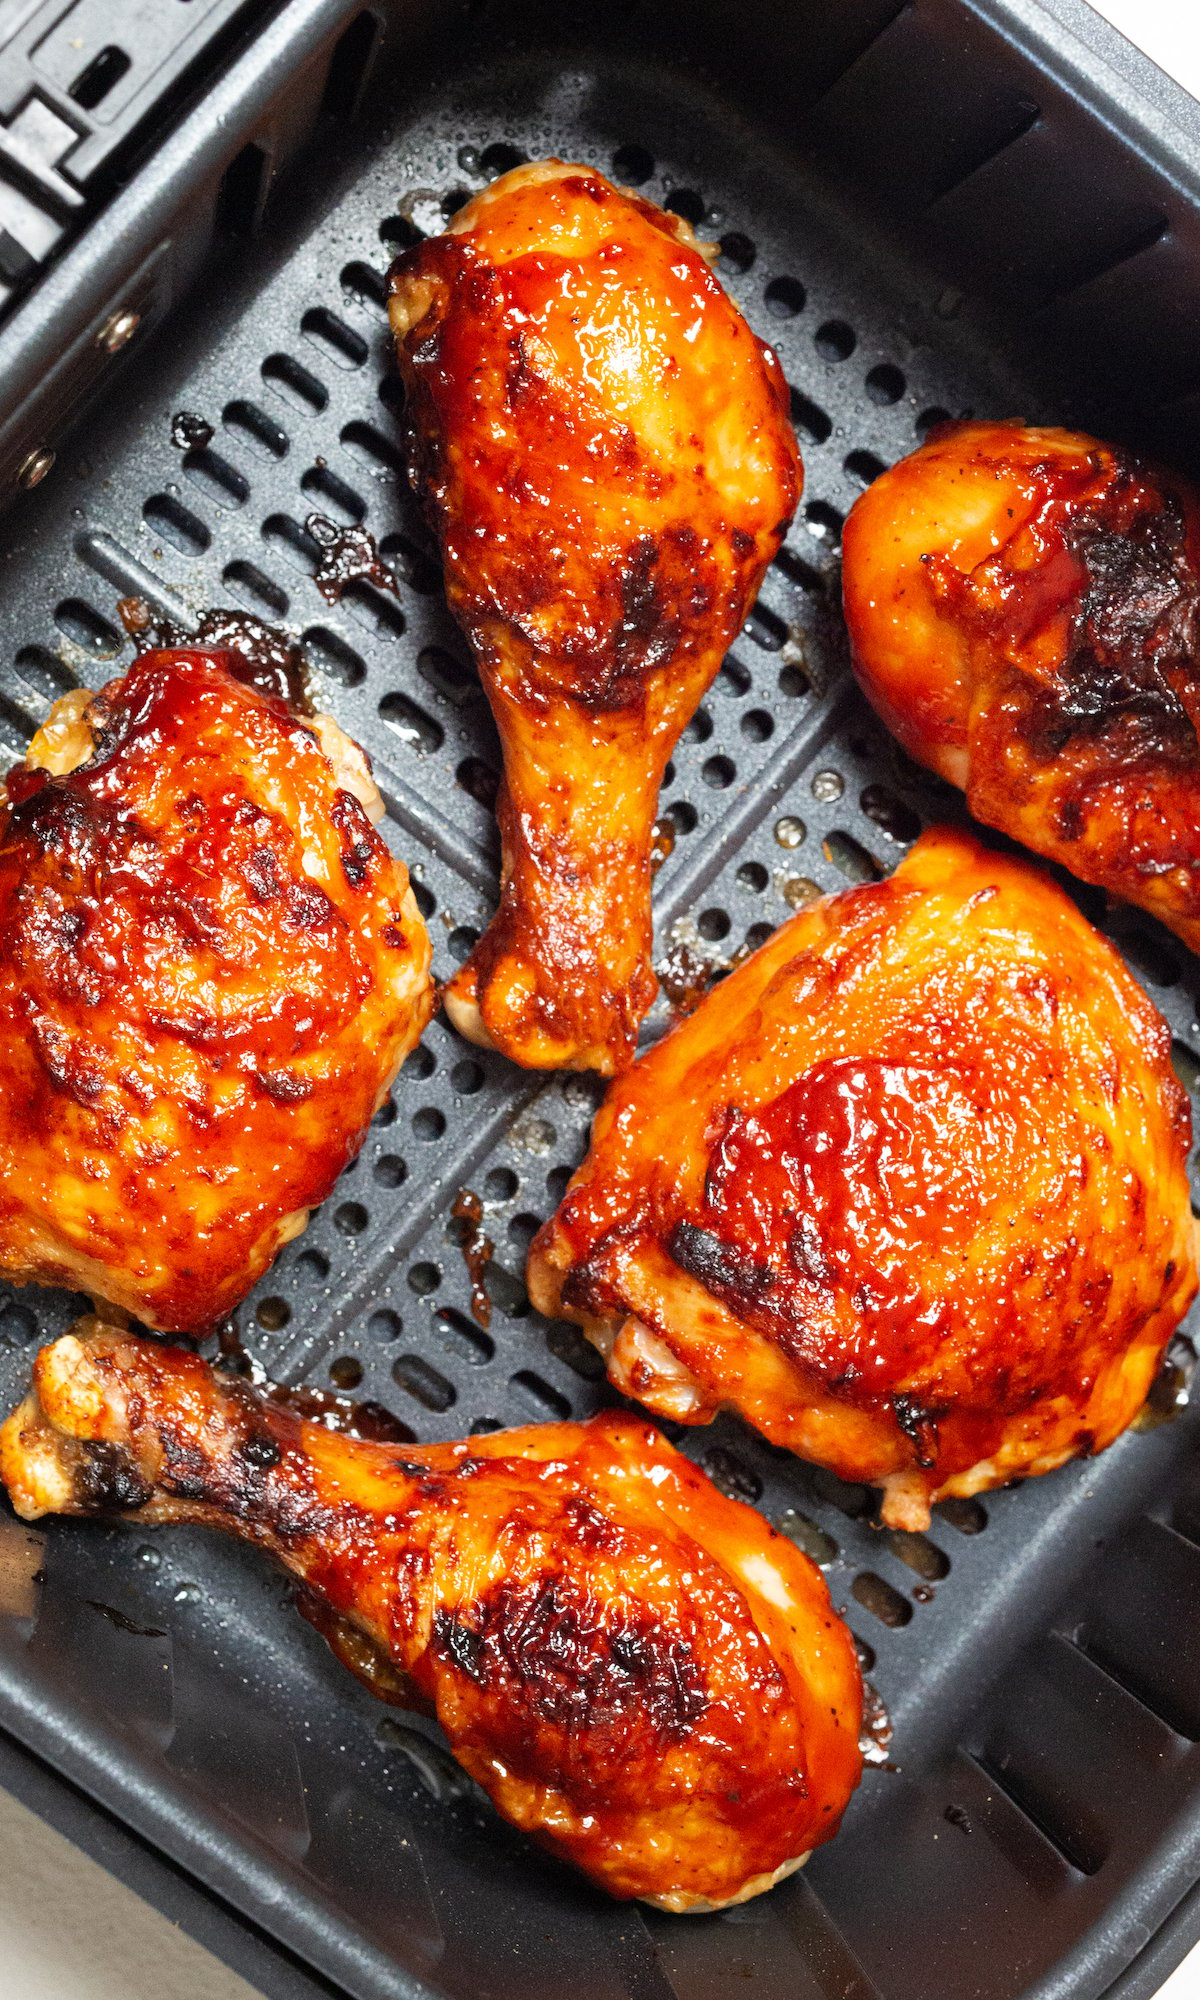 Cooked BBQ chicken legs and thighs in an air fryer basket.